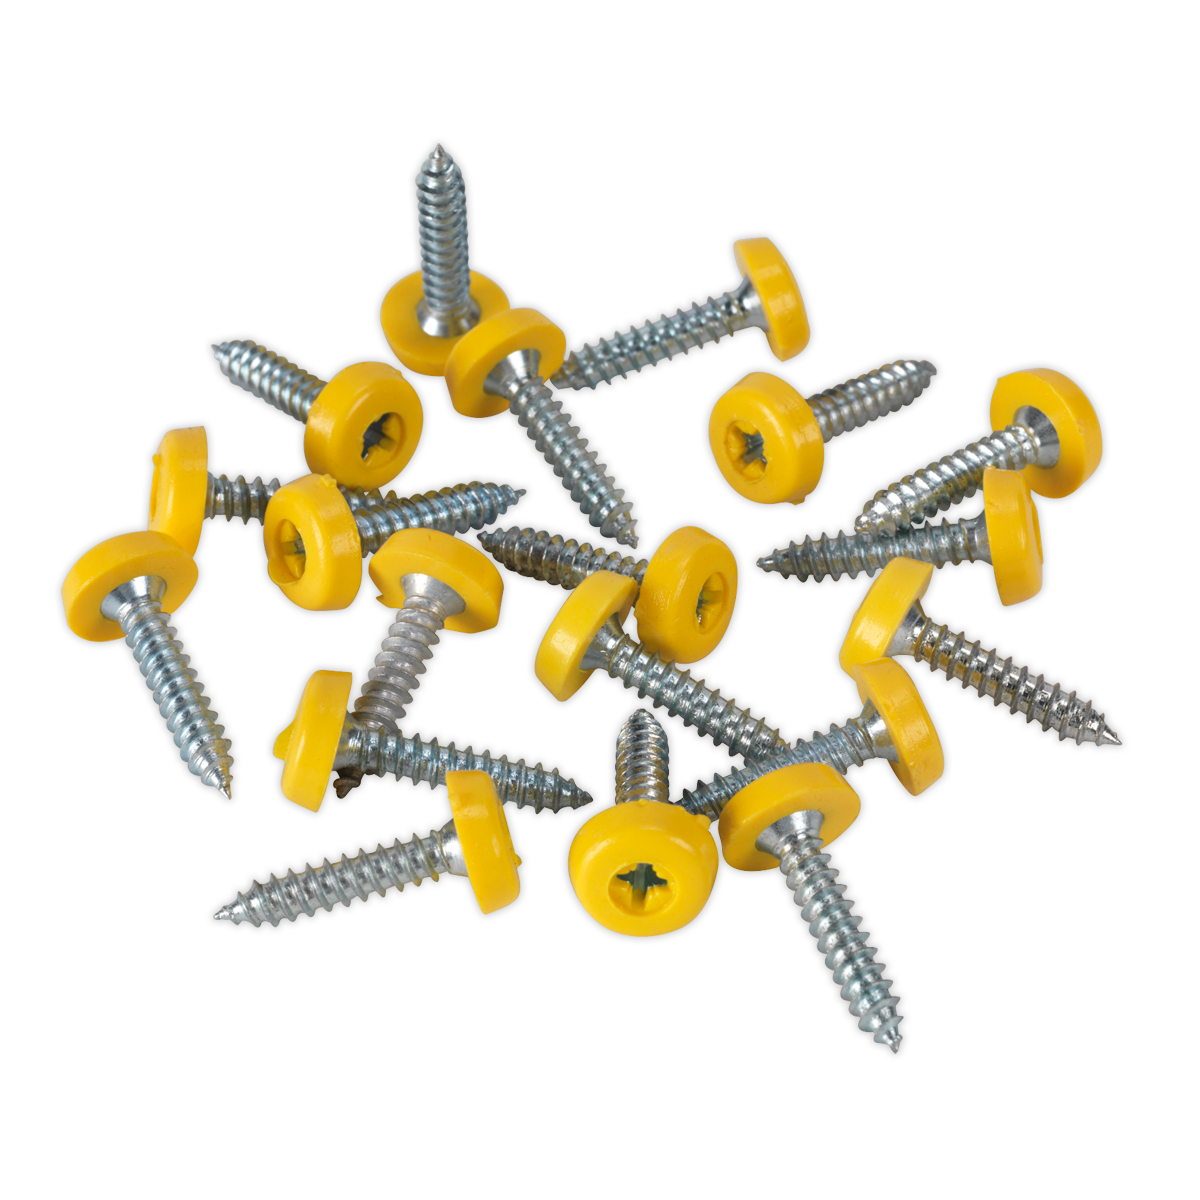 Numberplate Screw Plastic Enclosed Head 4.8 x 24mm Yellow Pack of 50 - PTNP6 - Farming Parts